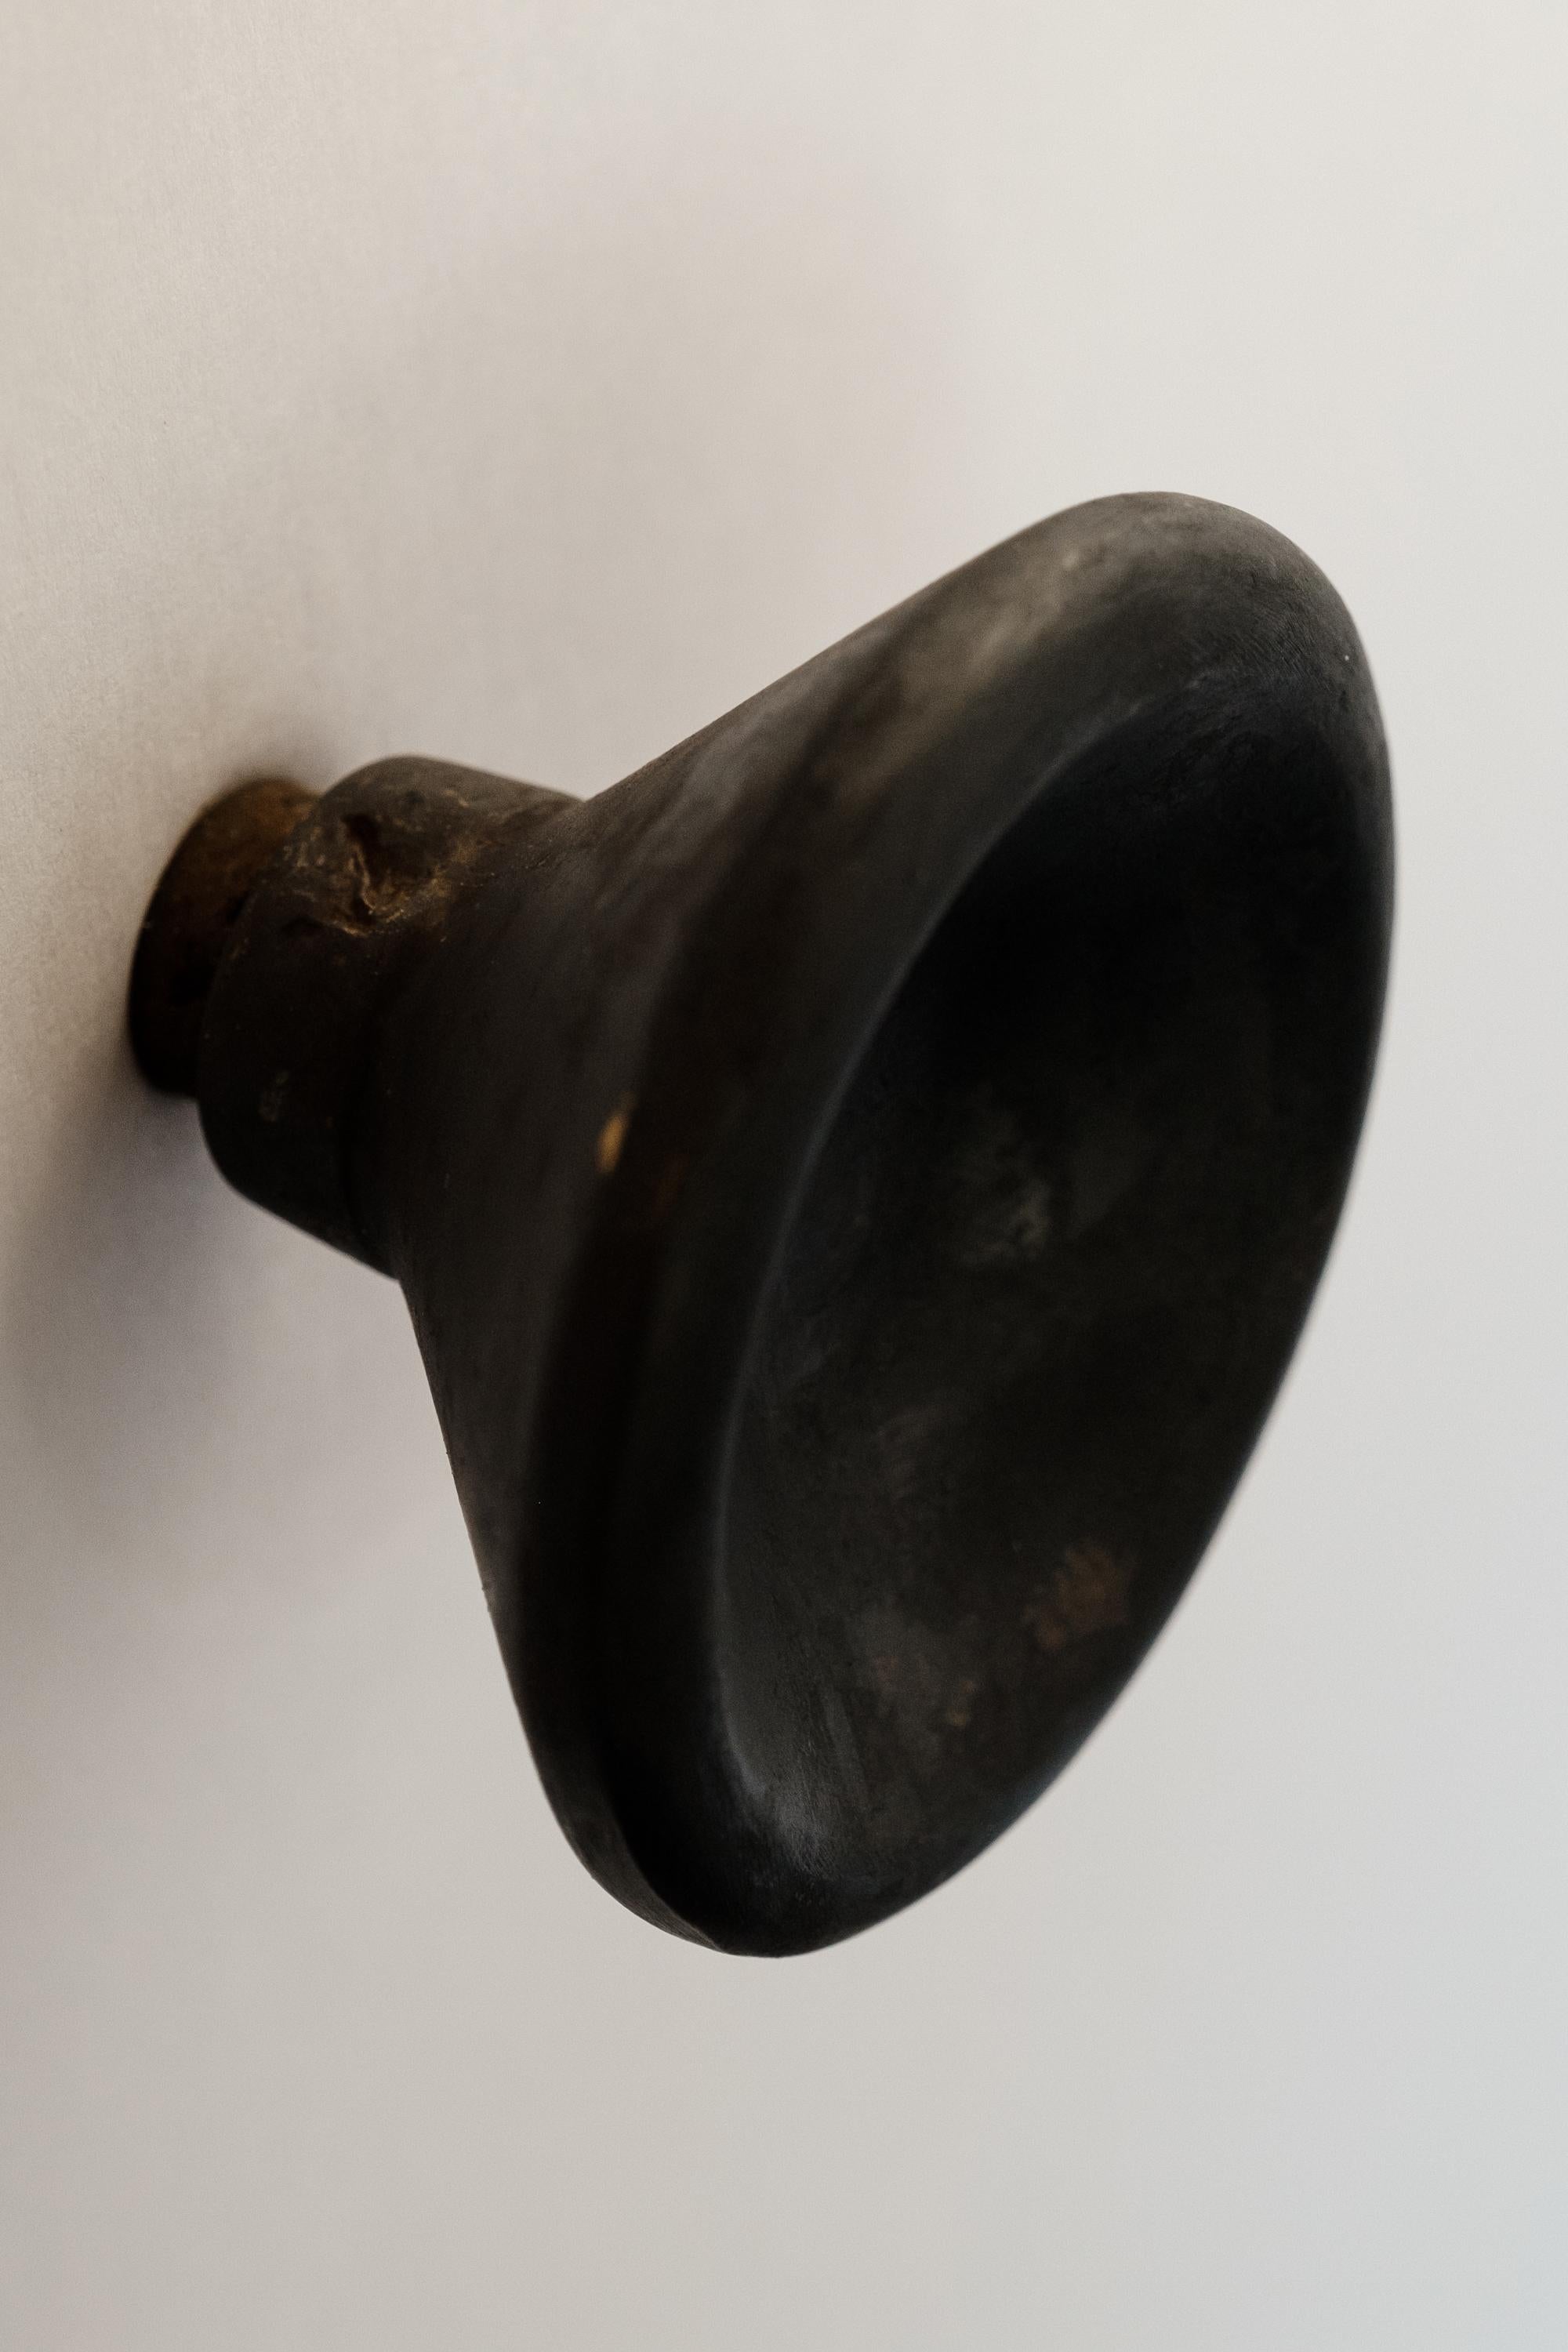 Carl Auböck Model #8040-2 patinated brass knob.

Designed in the 1950s, this versatile and Minimalist Viennese knob is executed in patinated brass by Werkstätte Carl Auböck, Austria. Its minimalist design combines clean form with